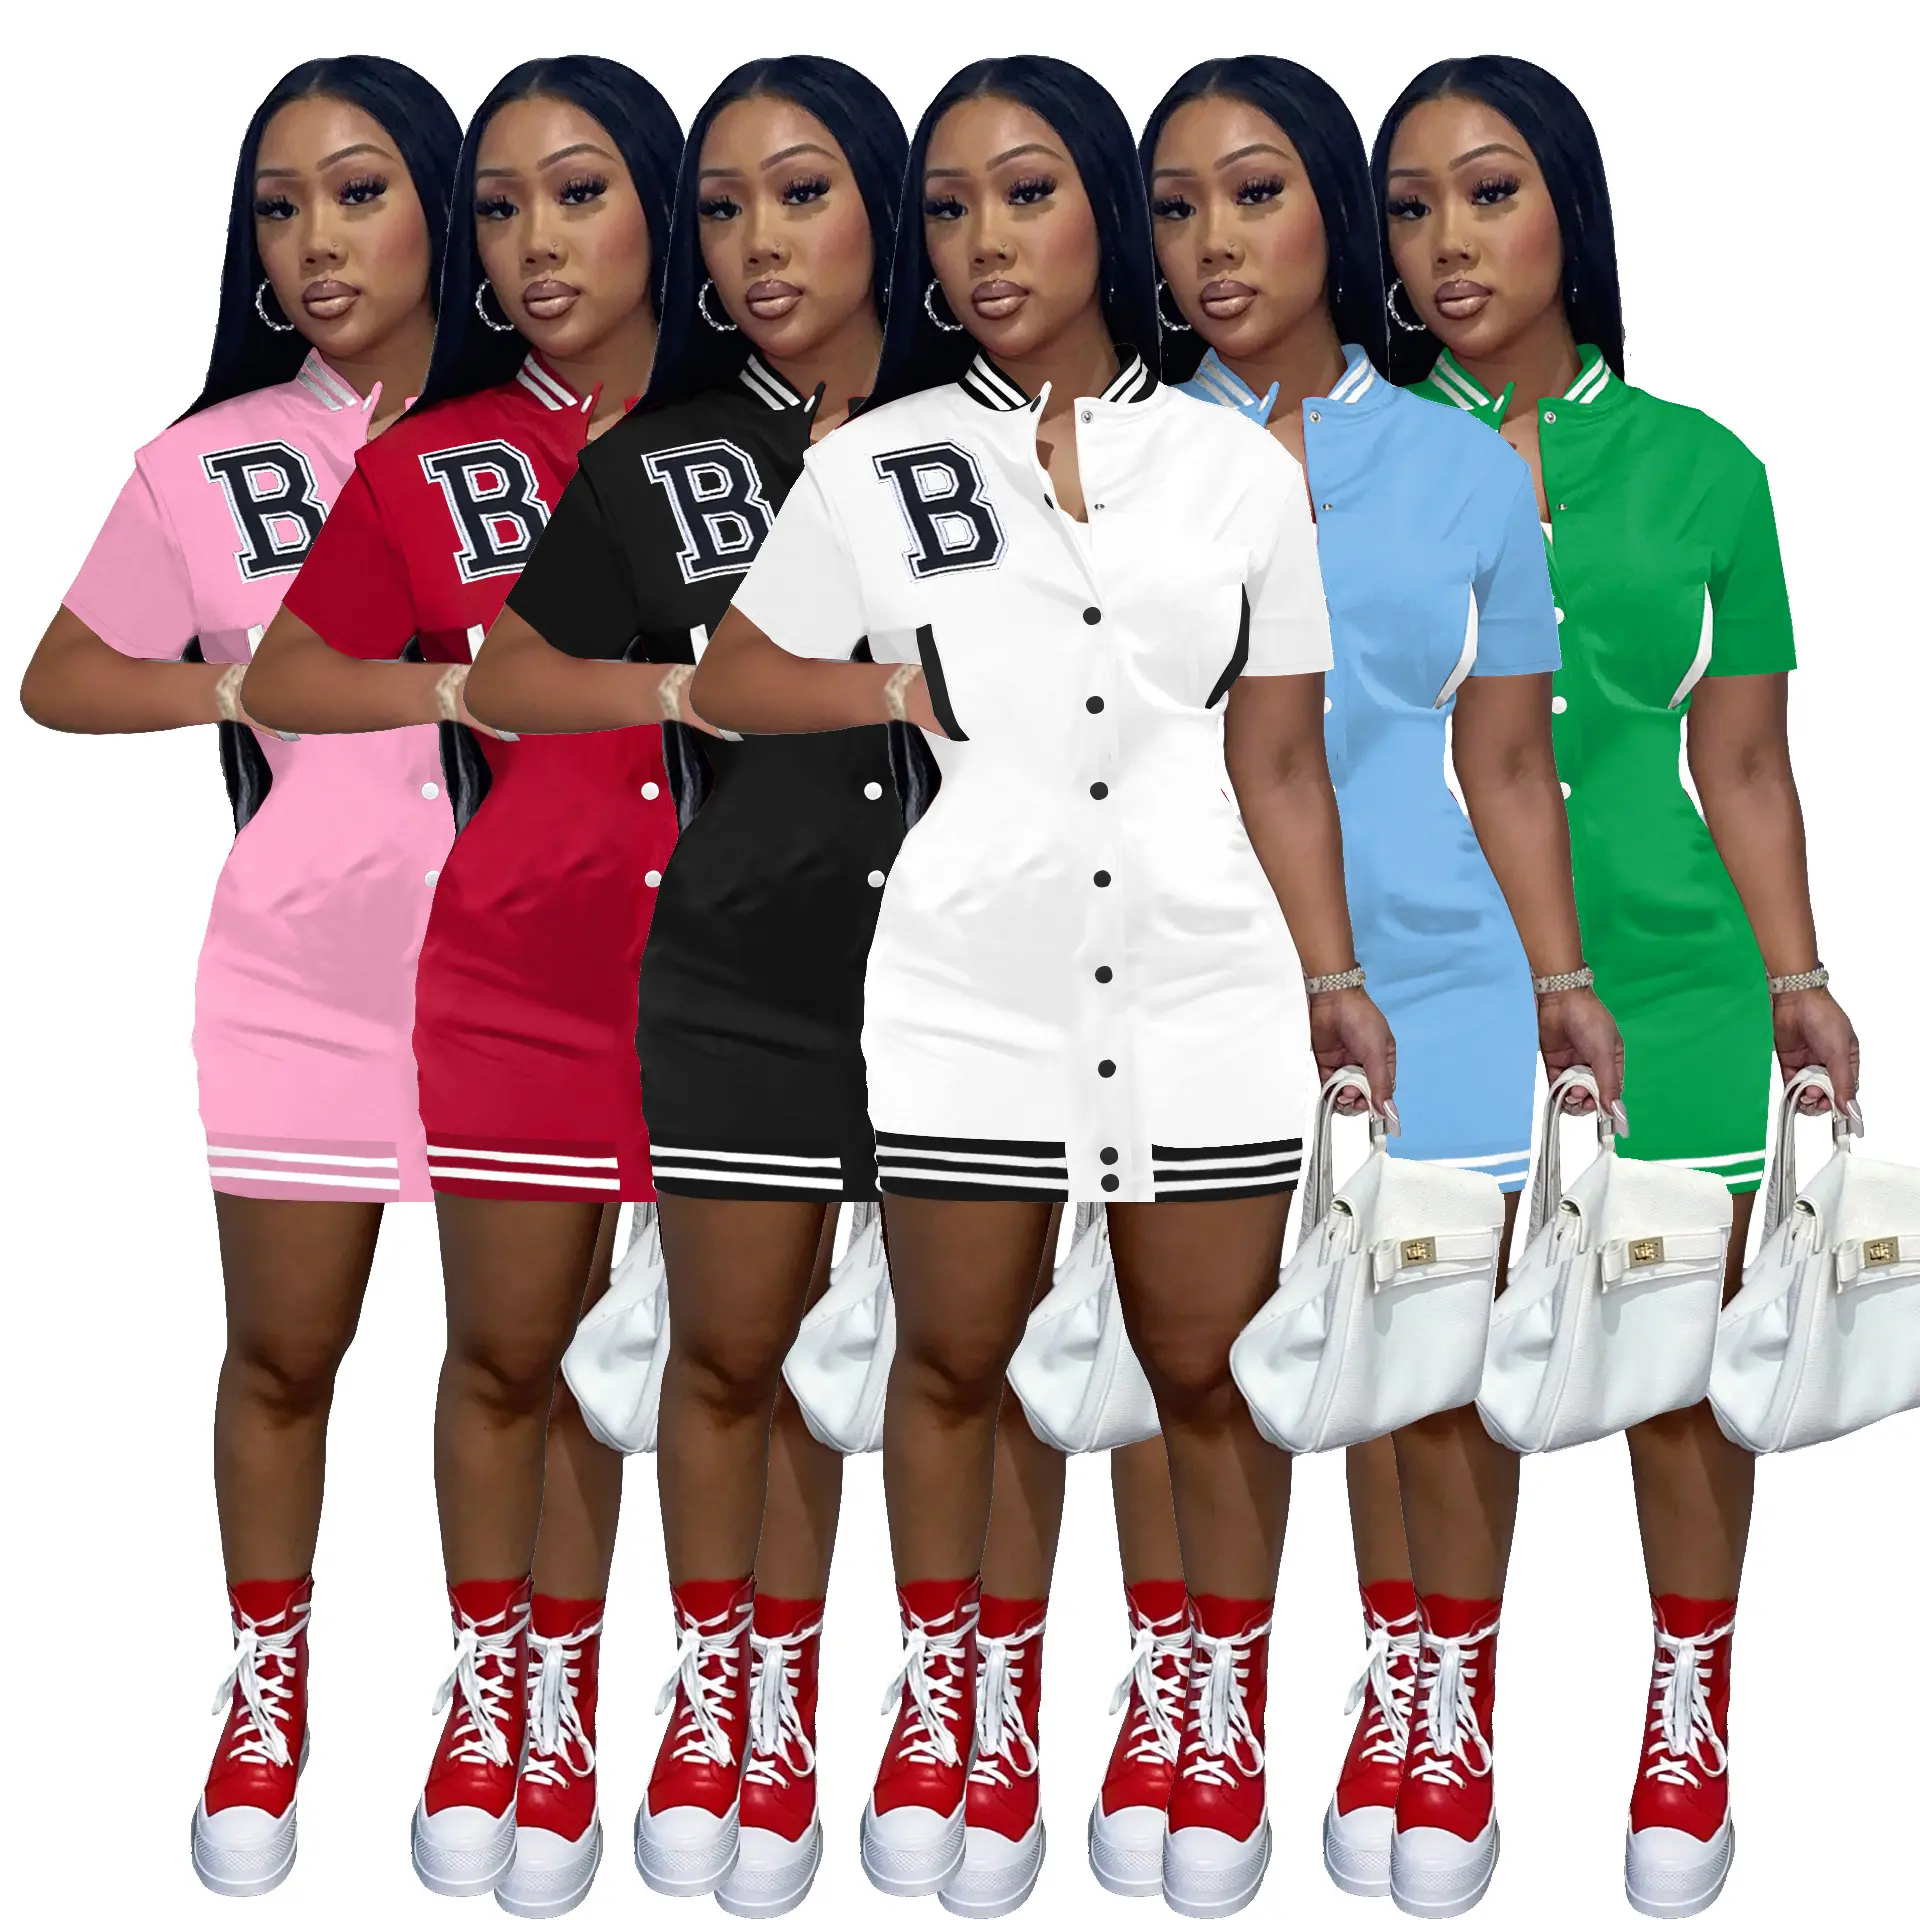 New short Sleeve Embroidered O Neck basketball jersey dresses for women